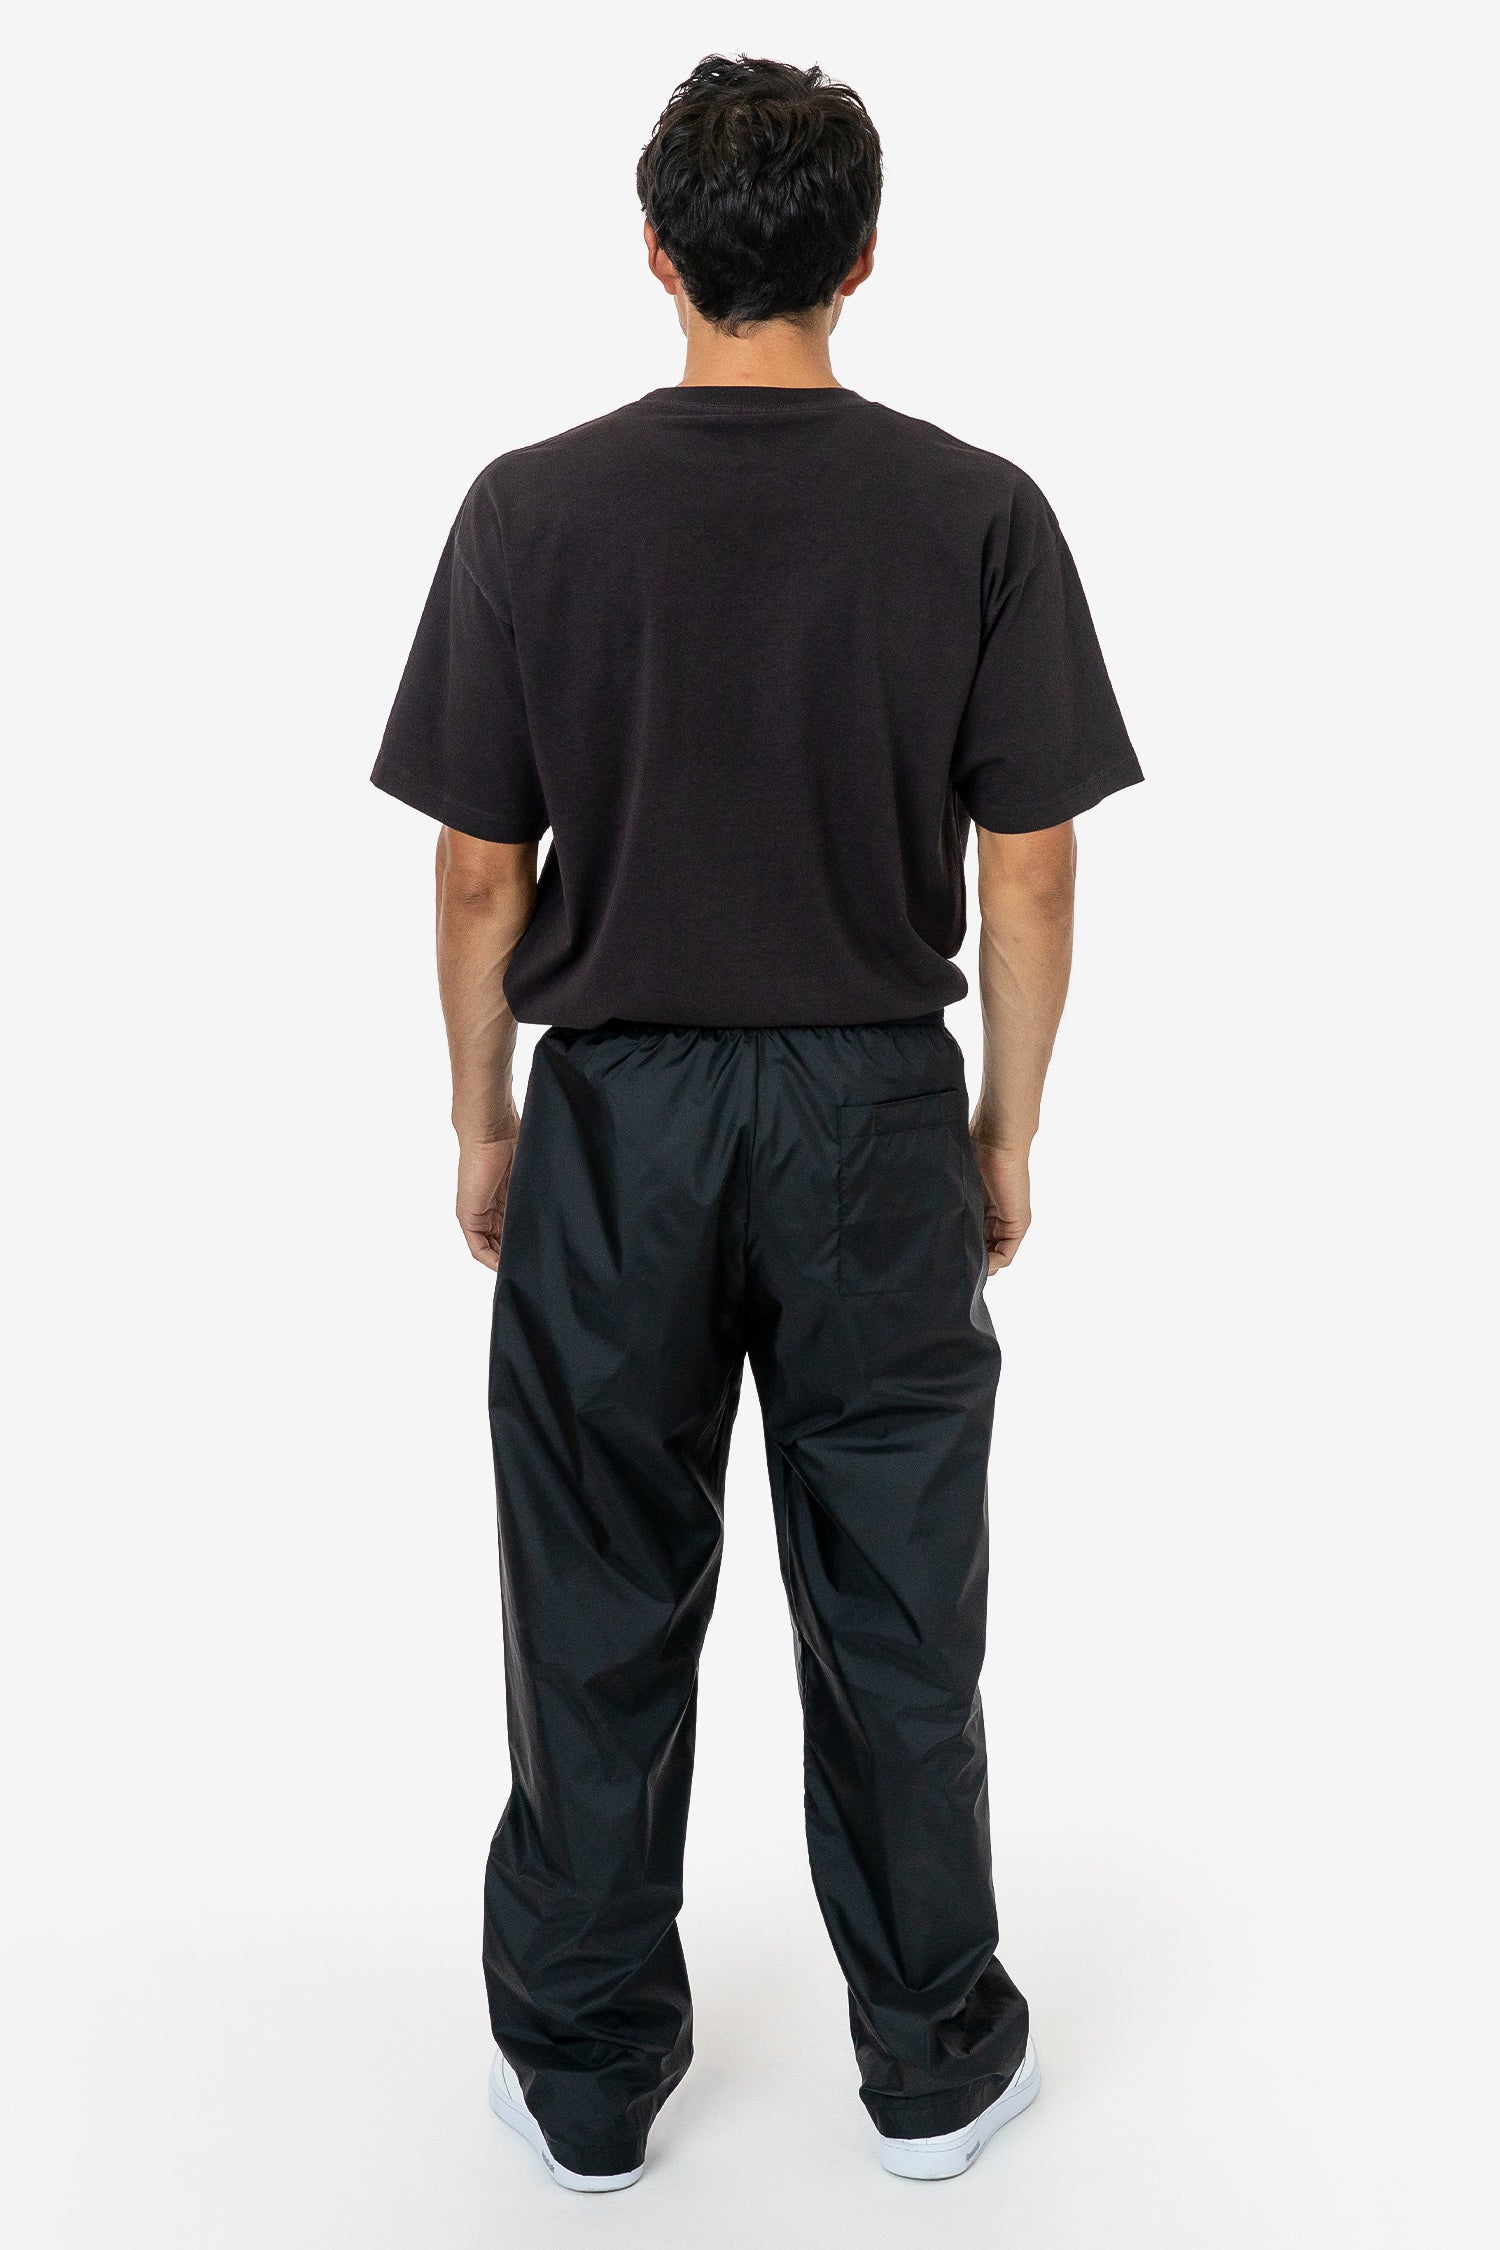 Check styling ideas for「Wide-Fit Pleated Pants (2022 Edition)」| UNIQLO US